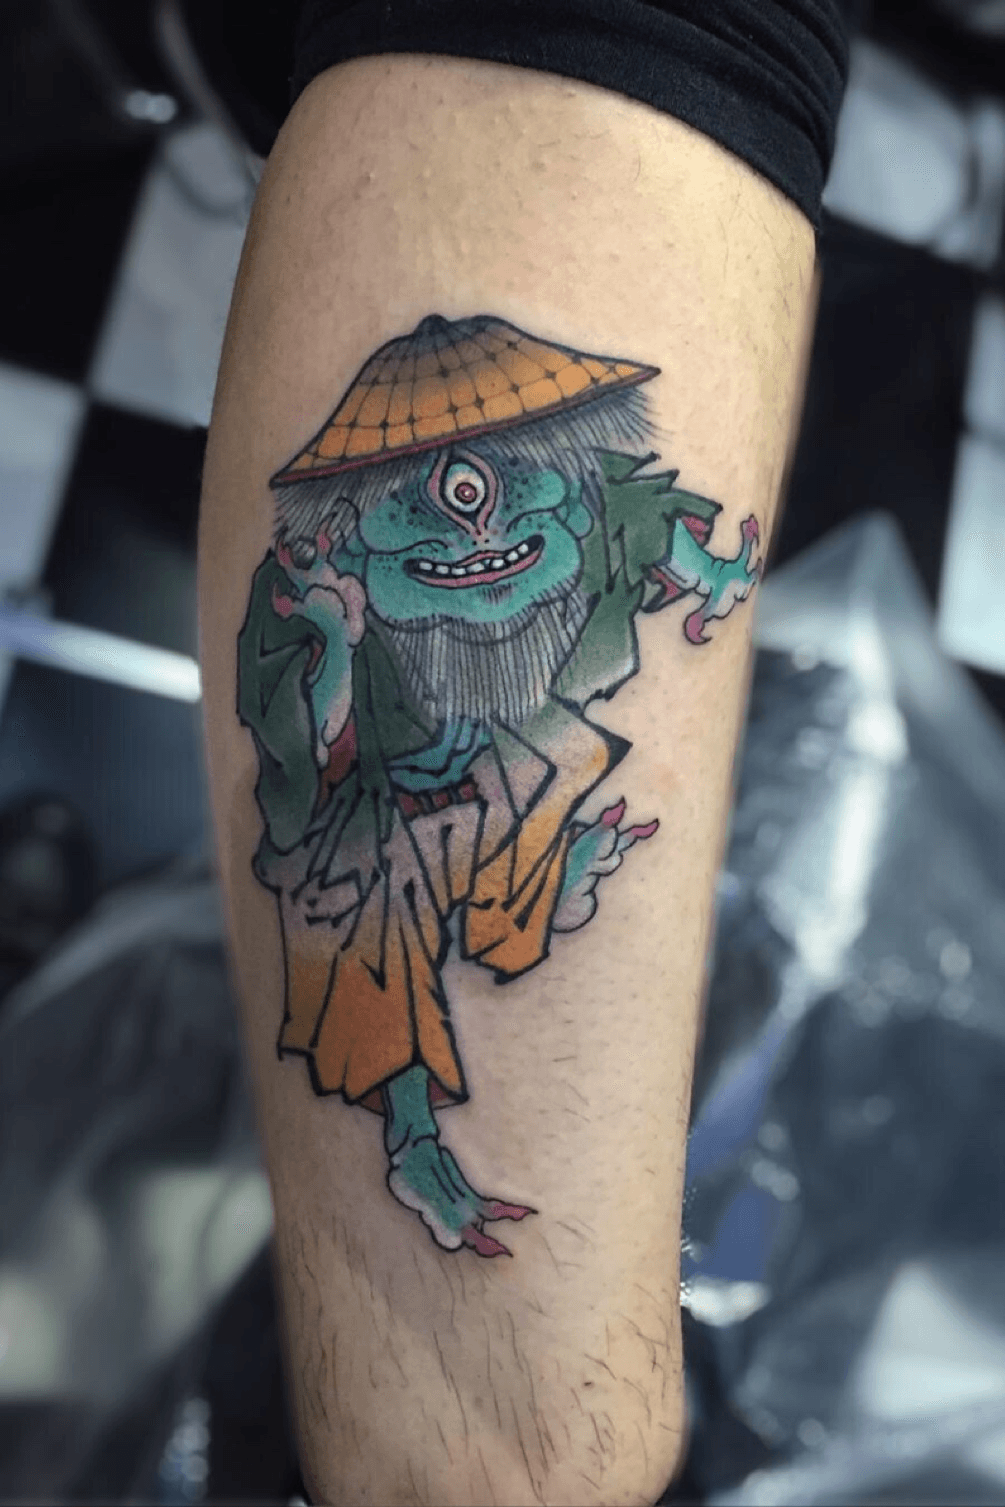 Yōkai tattoo located on the thigh traditional style